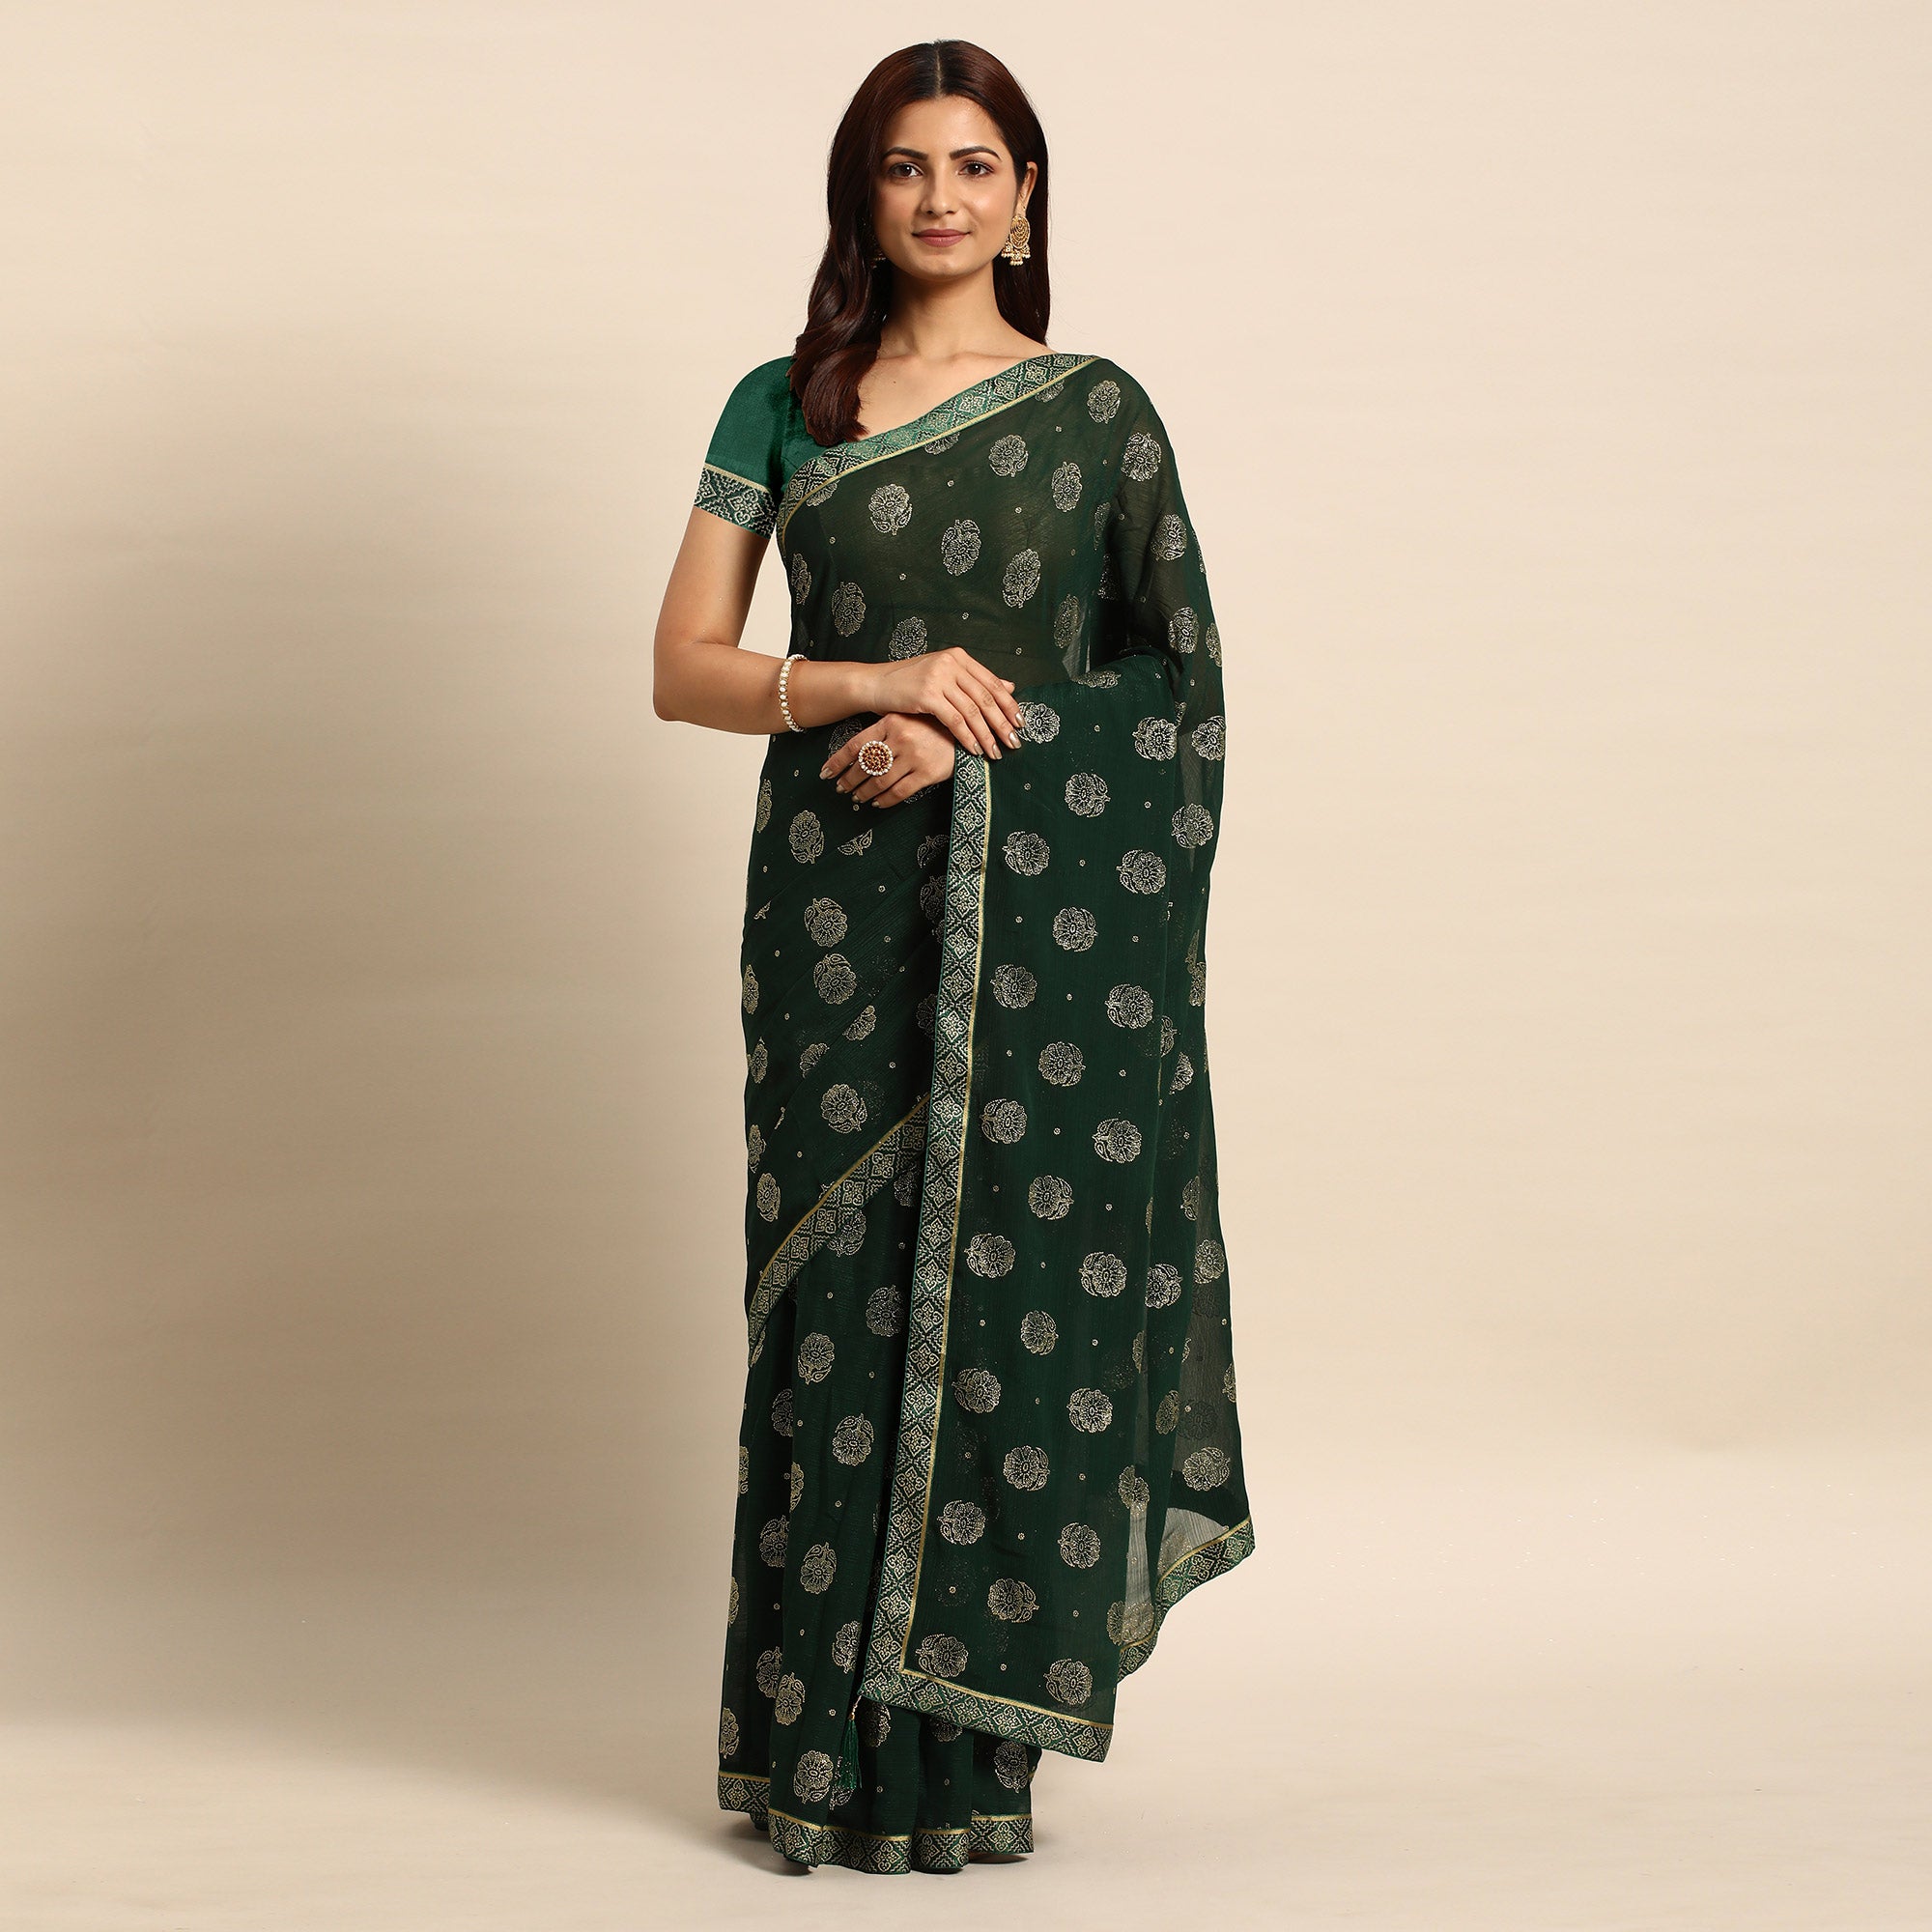 Green Foil Printed With Embellished Chiffon Saree